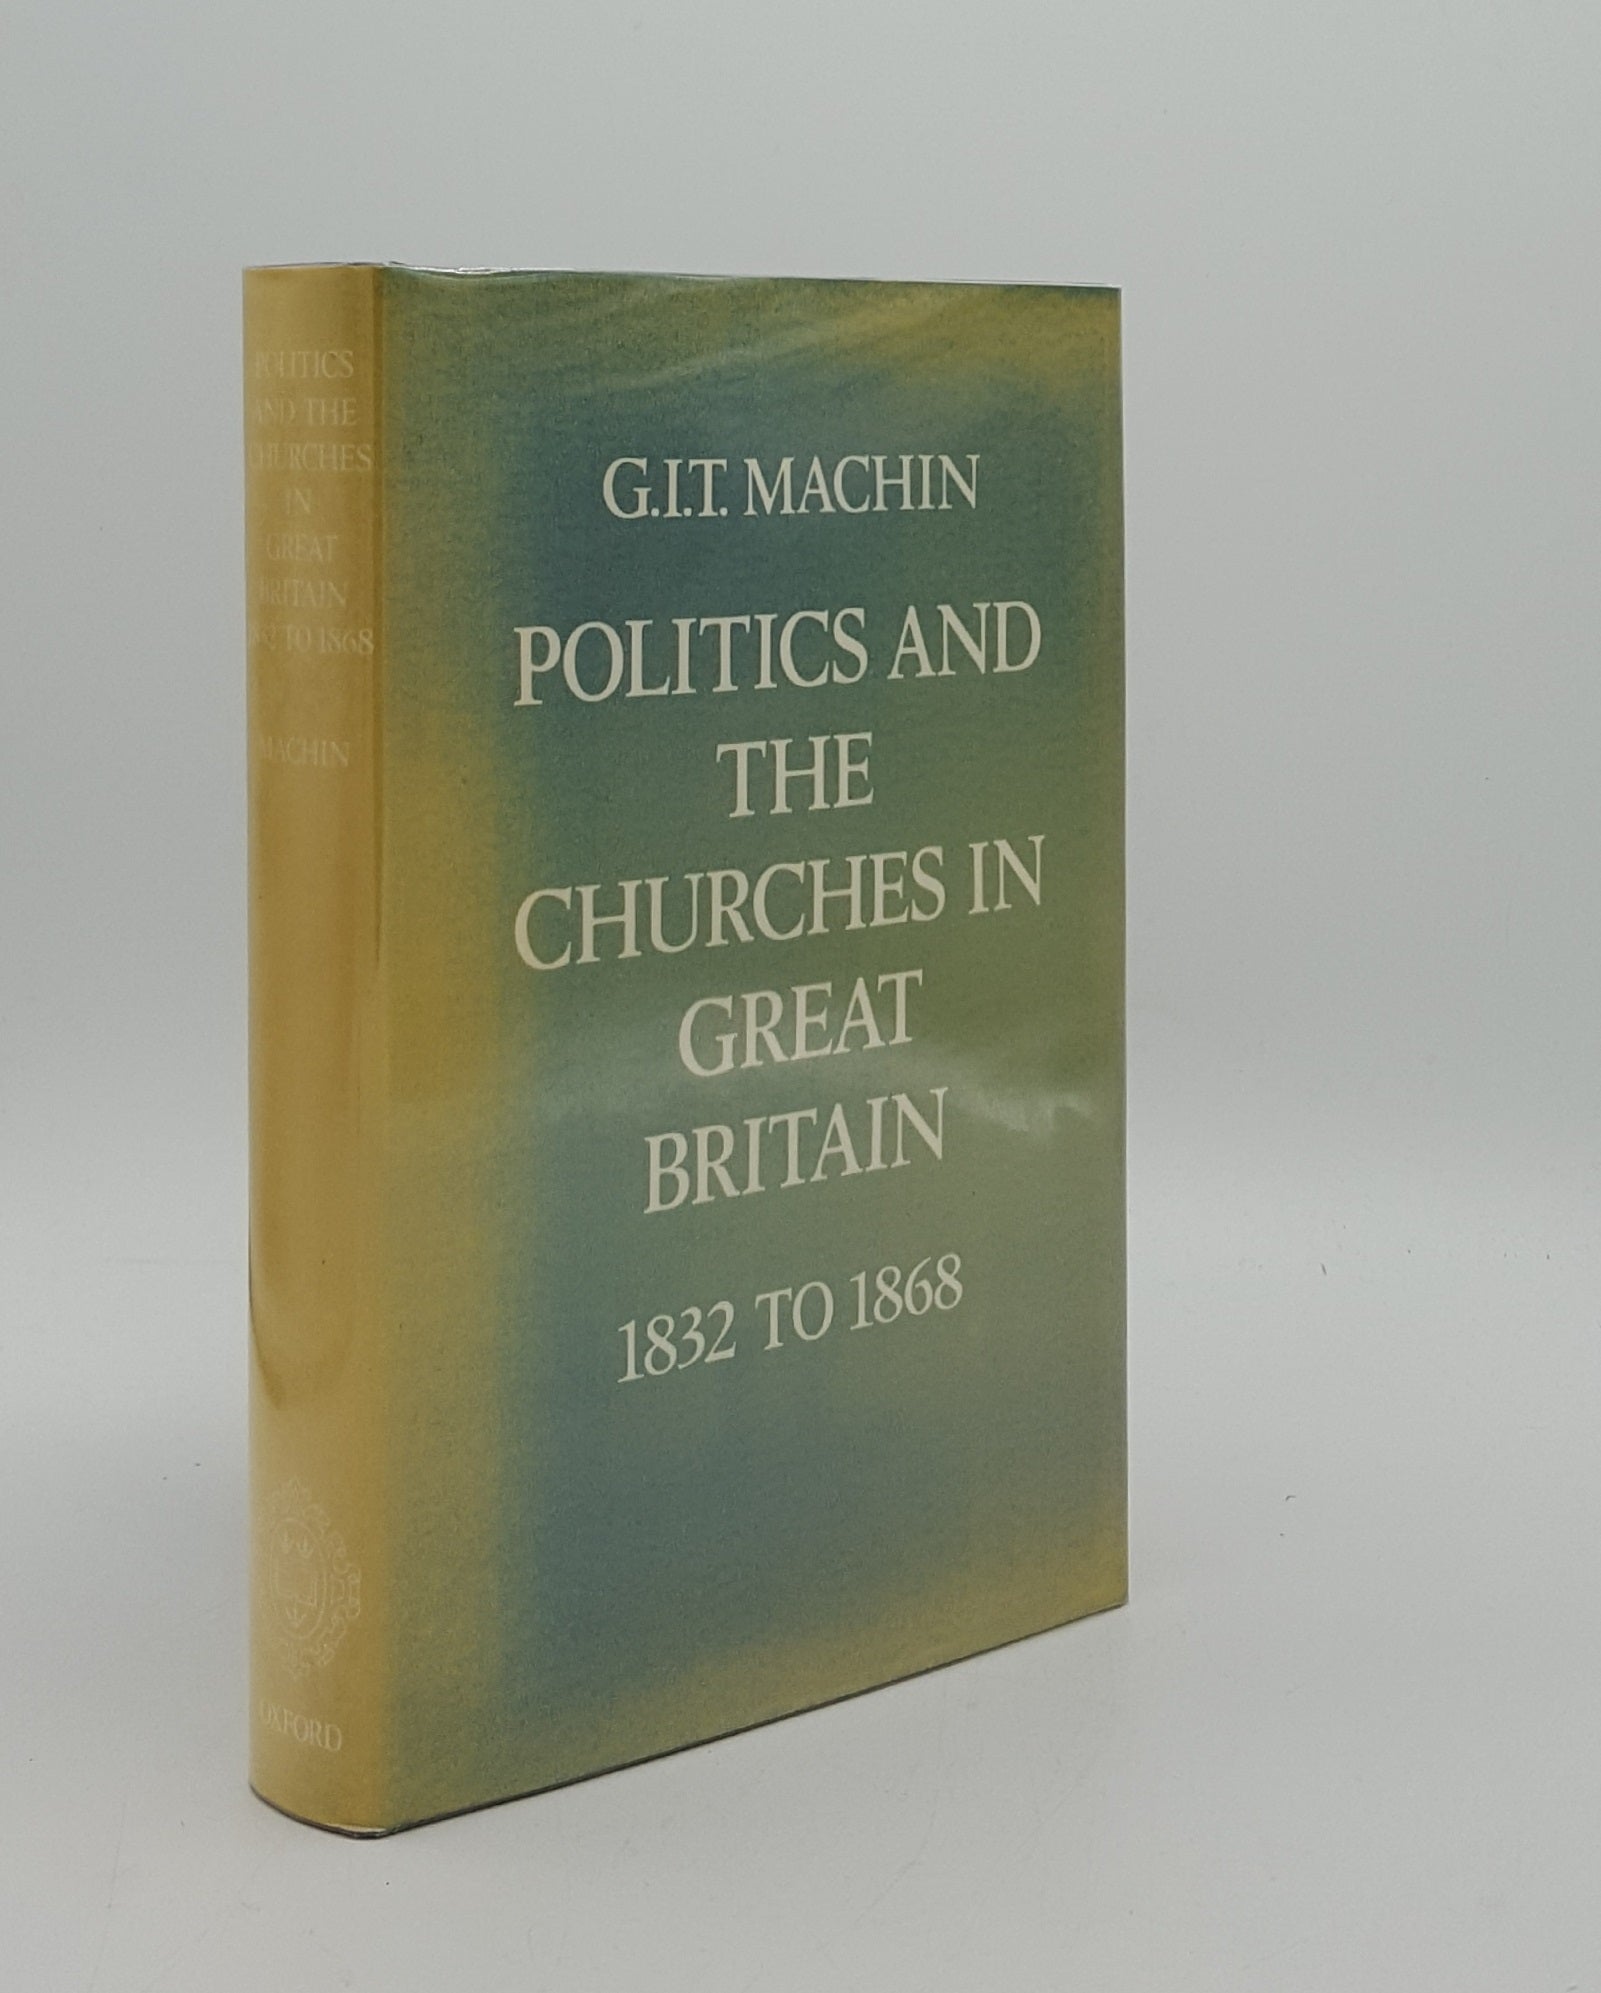 MACHIN G.I.T. - Politics and the Churches in Great Britain 1832 to 1868